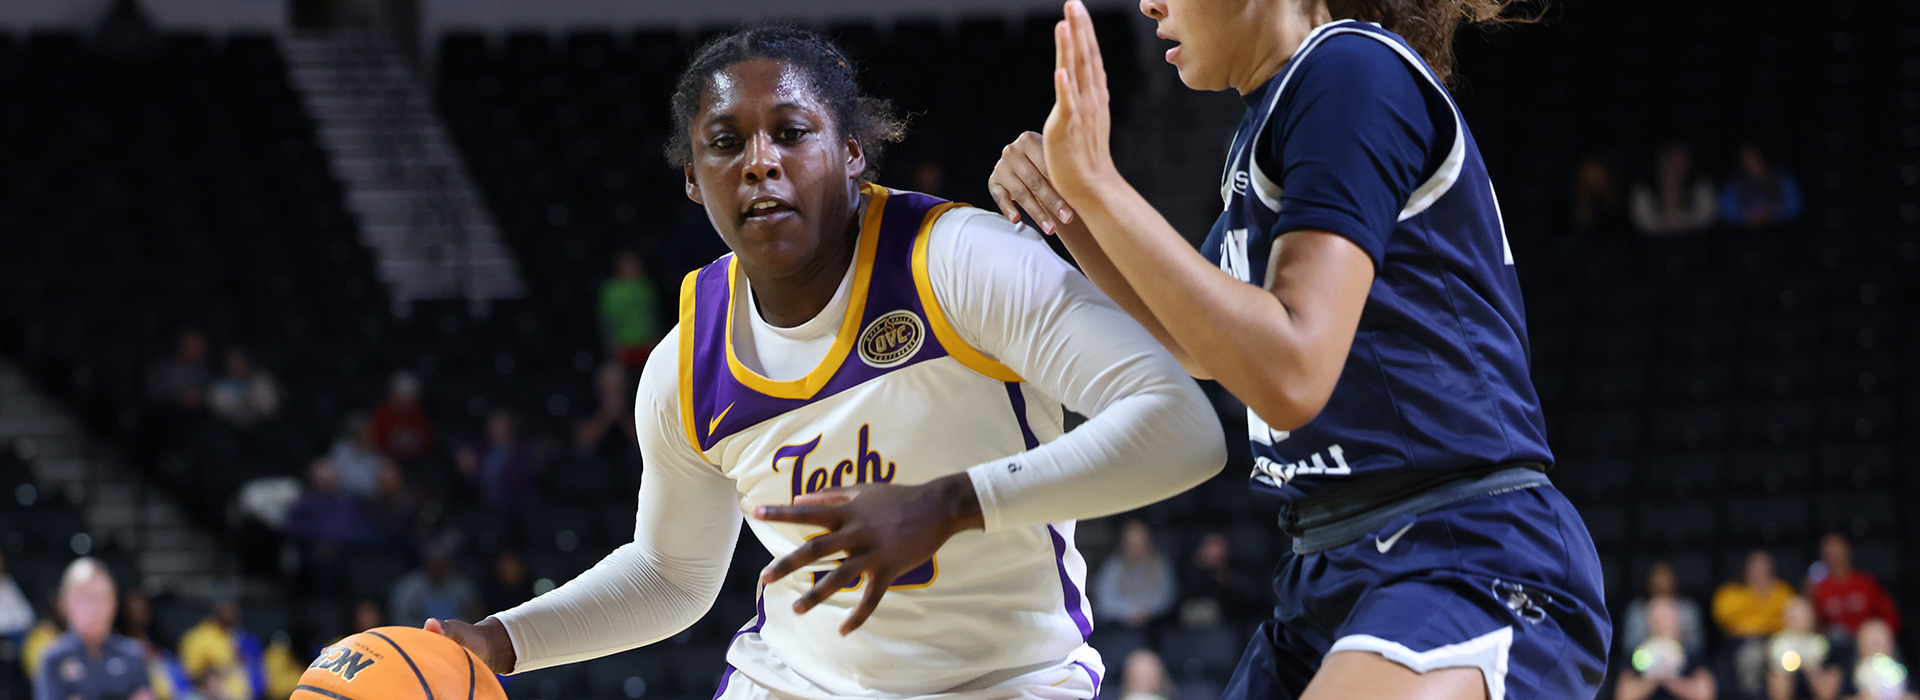 Grimes leads the way as Tech women top Lincoln Memorial